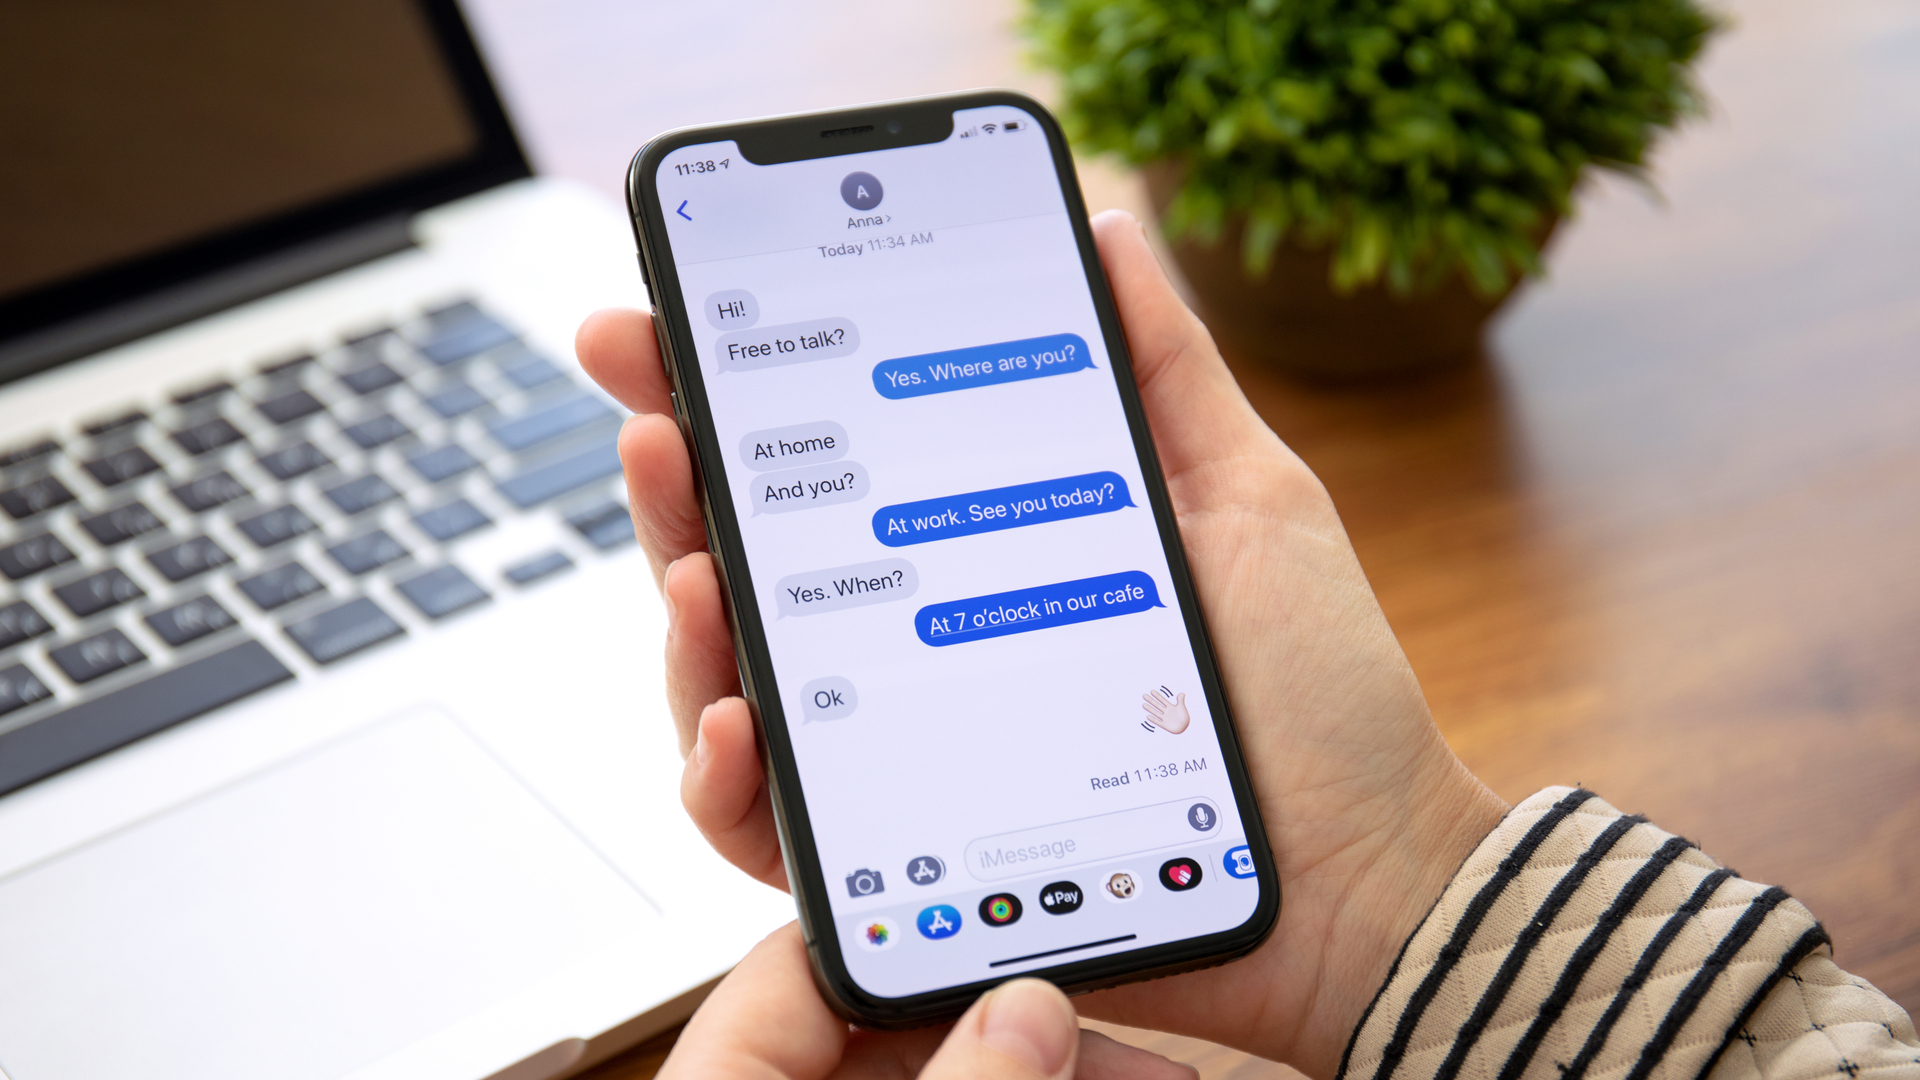 Image showing an iPhone with the iMessage app open